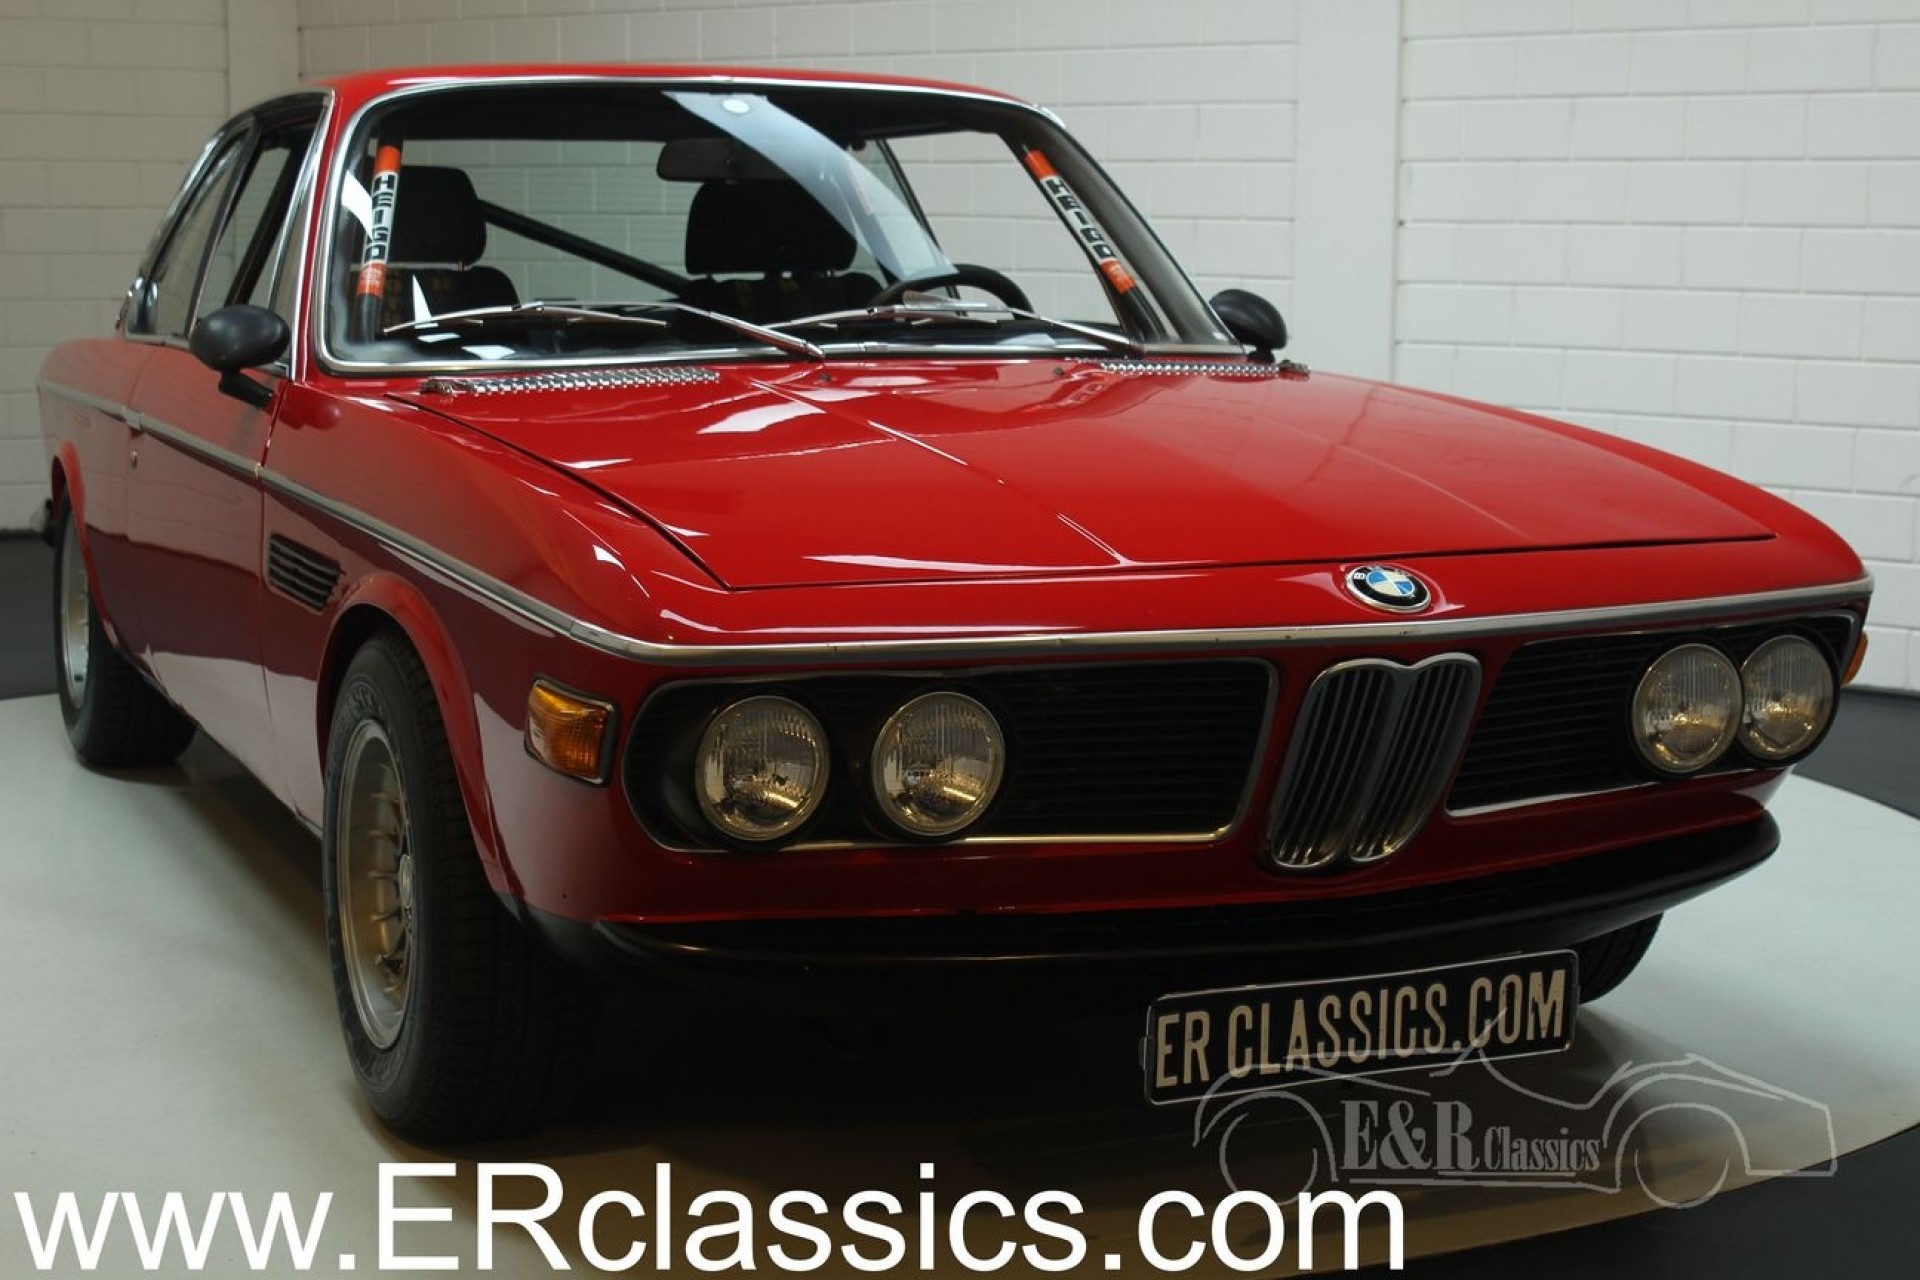 Bmw 3 0 Csl 1973 For Sale At Erclassics